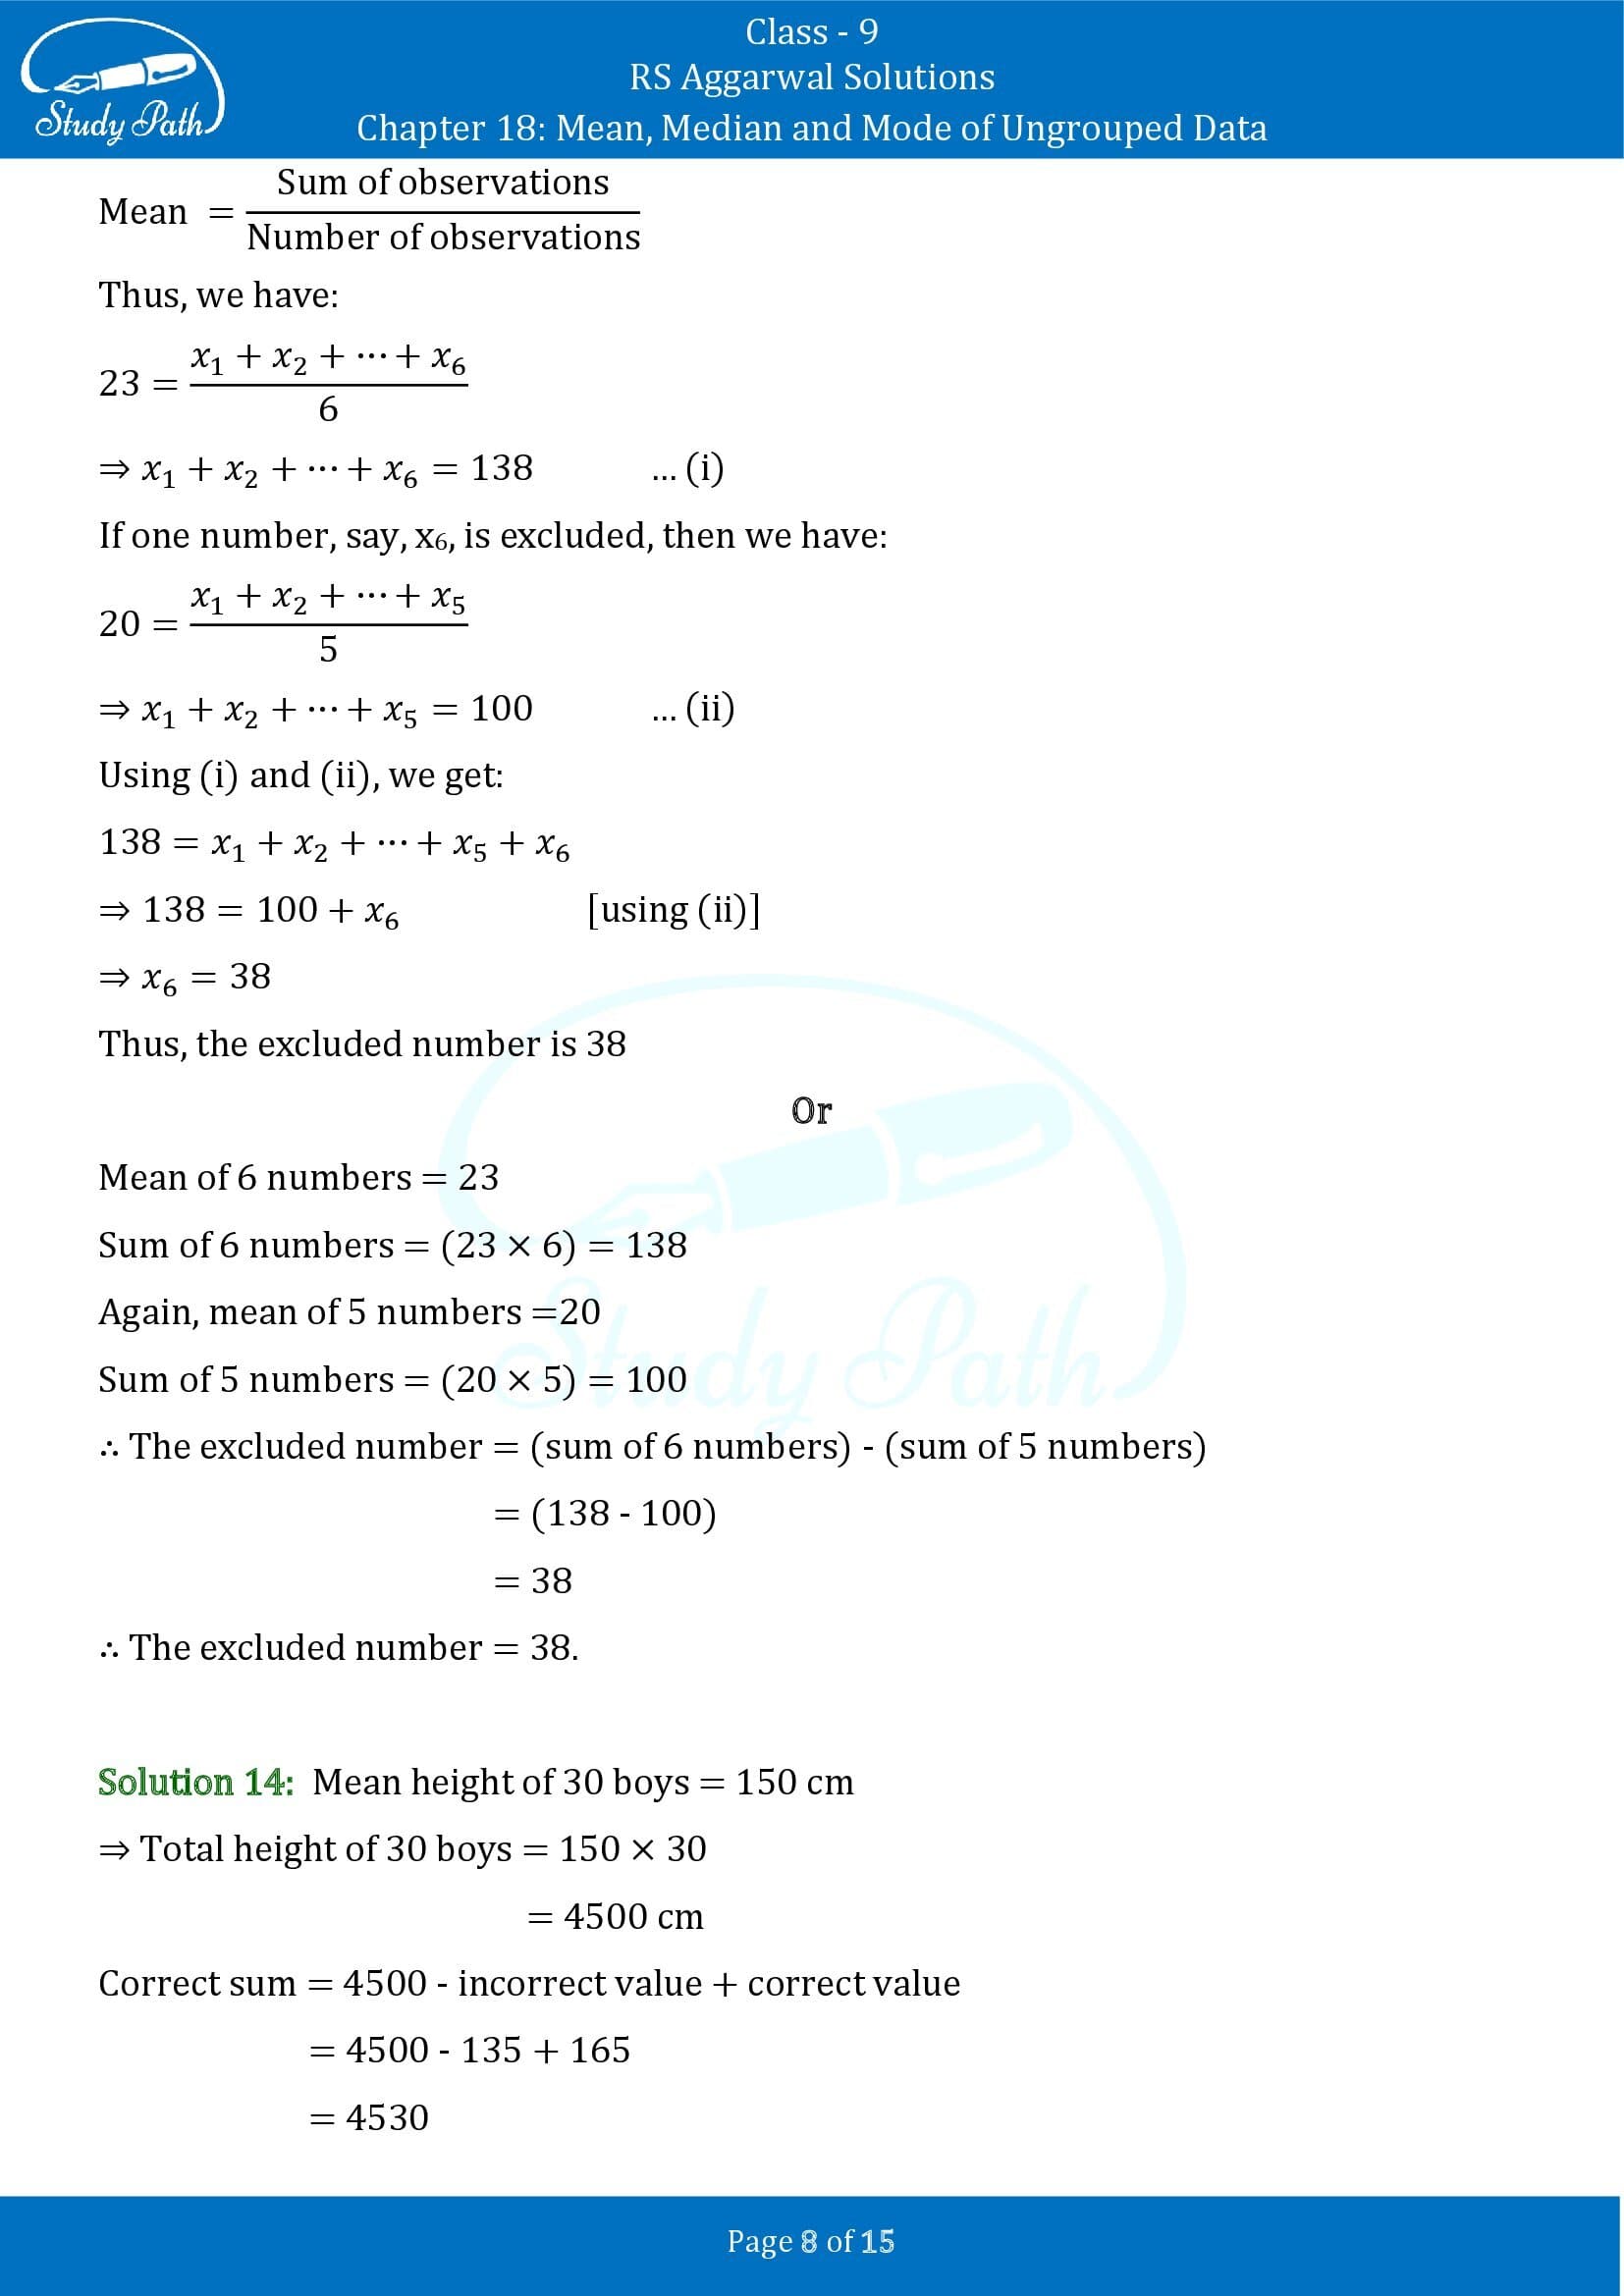 RS Aggarwal Solutions Class 9 Chapter 18 Mean Median and Mode of Ungrouped Data Exercise 18A 00008